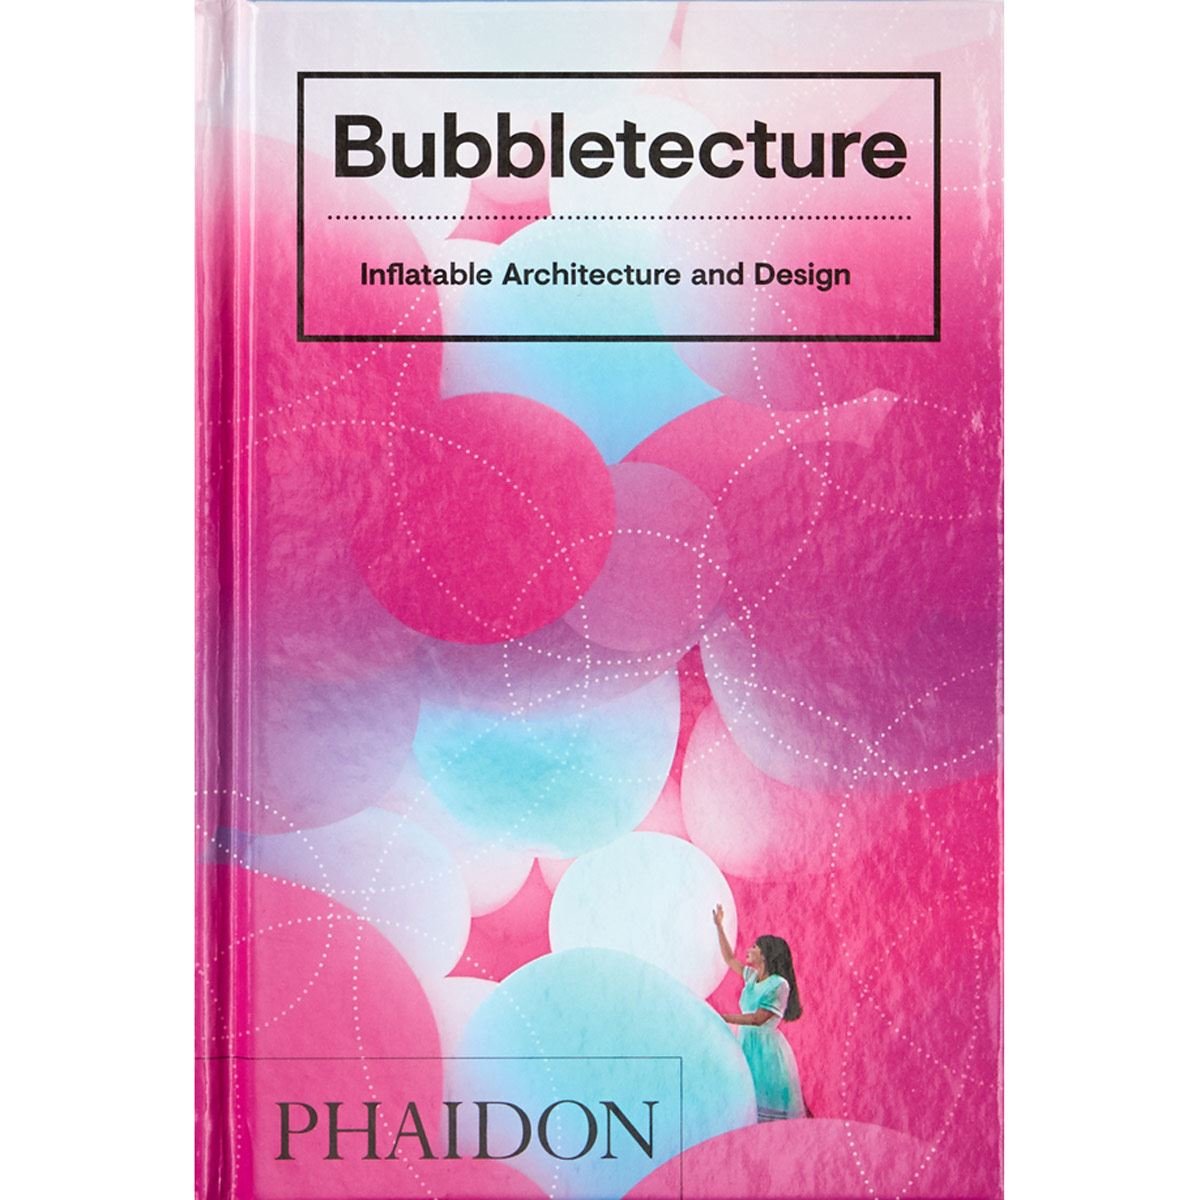 Bubbletecture. Inflatable Architecture and Design